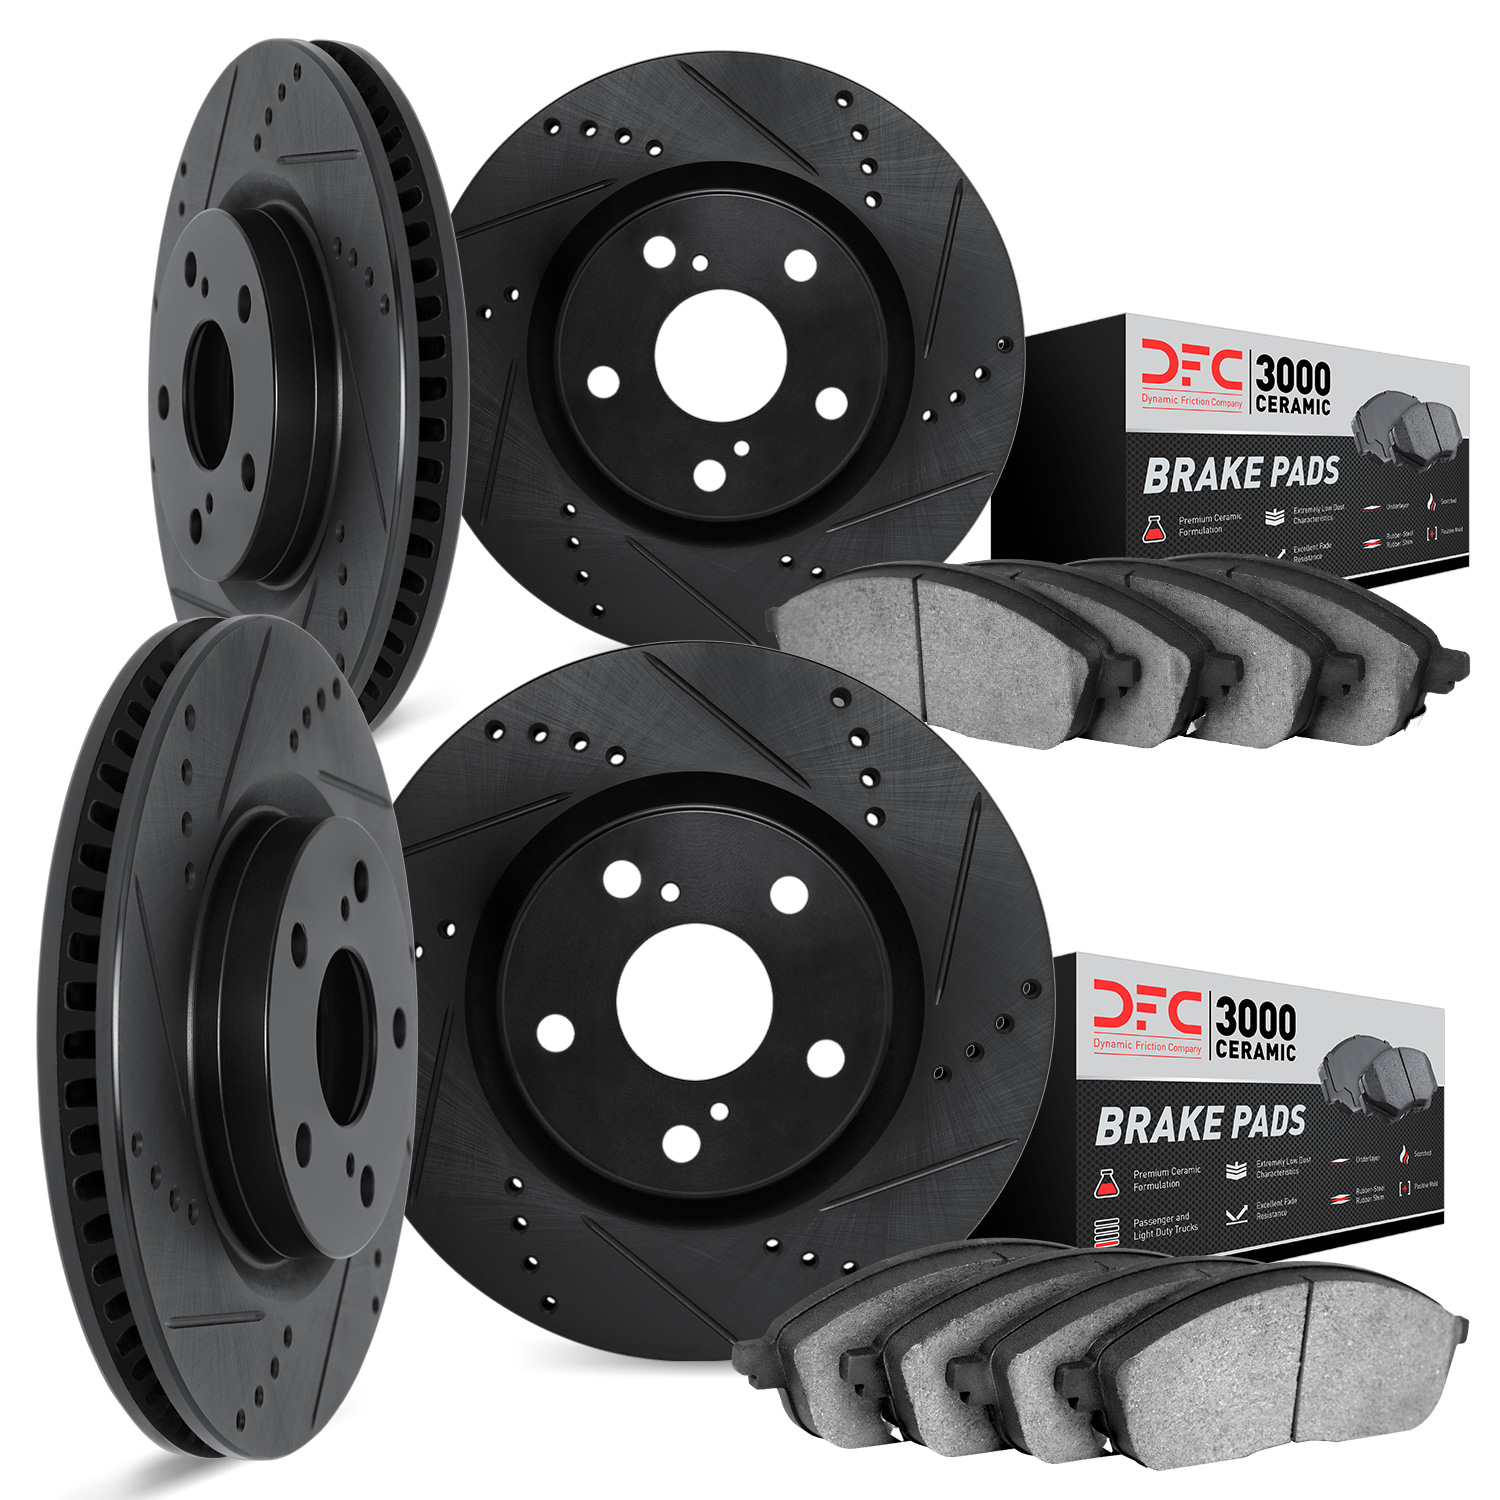 8304-27075 Drilled/Slotted Brake Rotors with 3000-Series Ceramic Brake Pads Kit [Black], 2010-2016 Volvo, Position: Front and Re